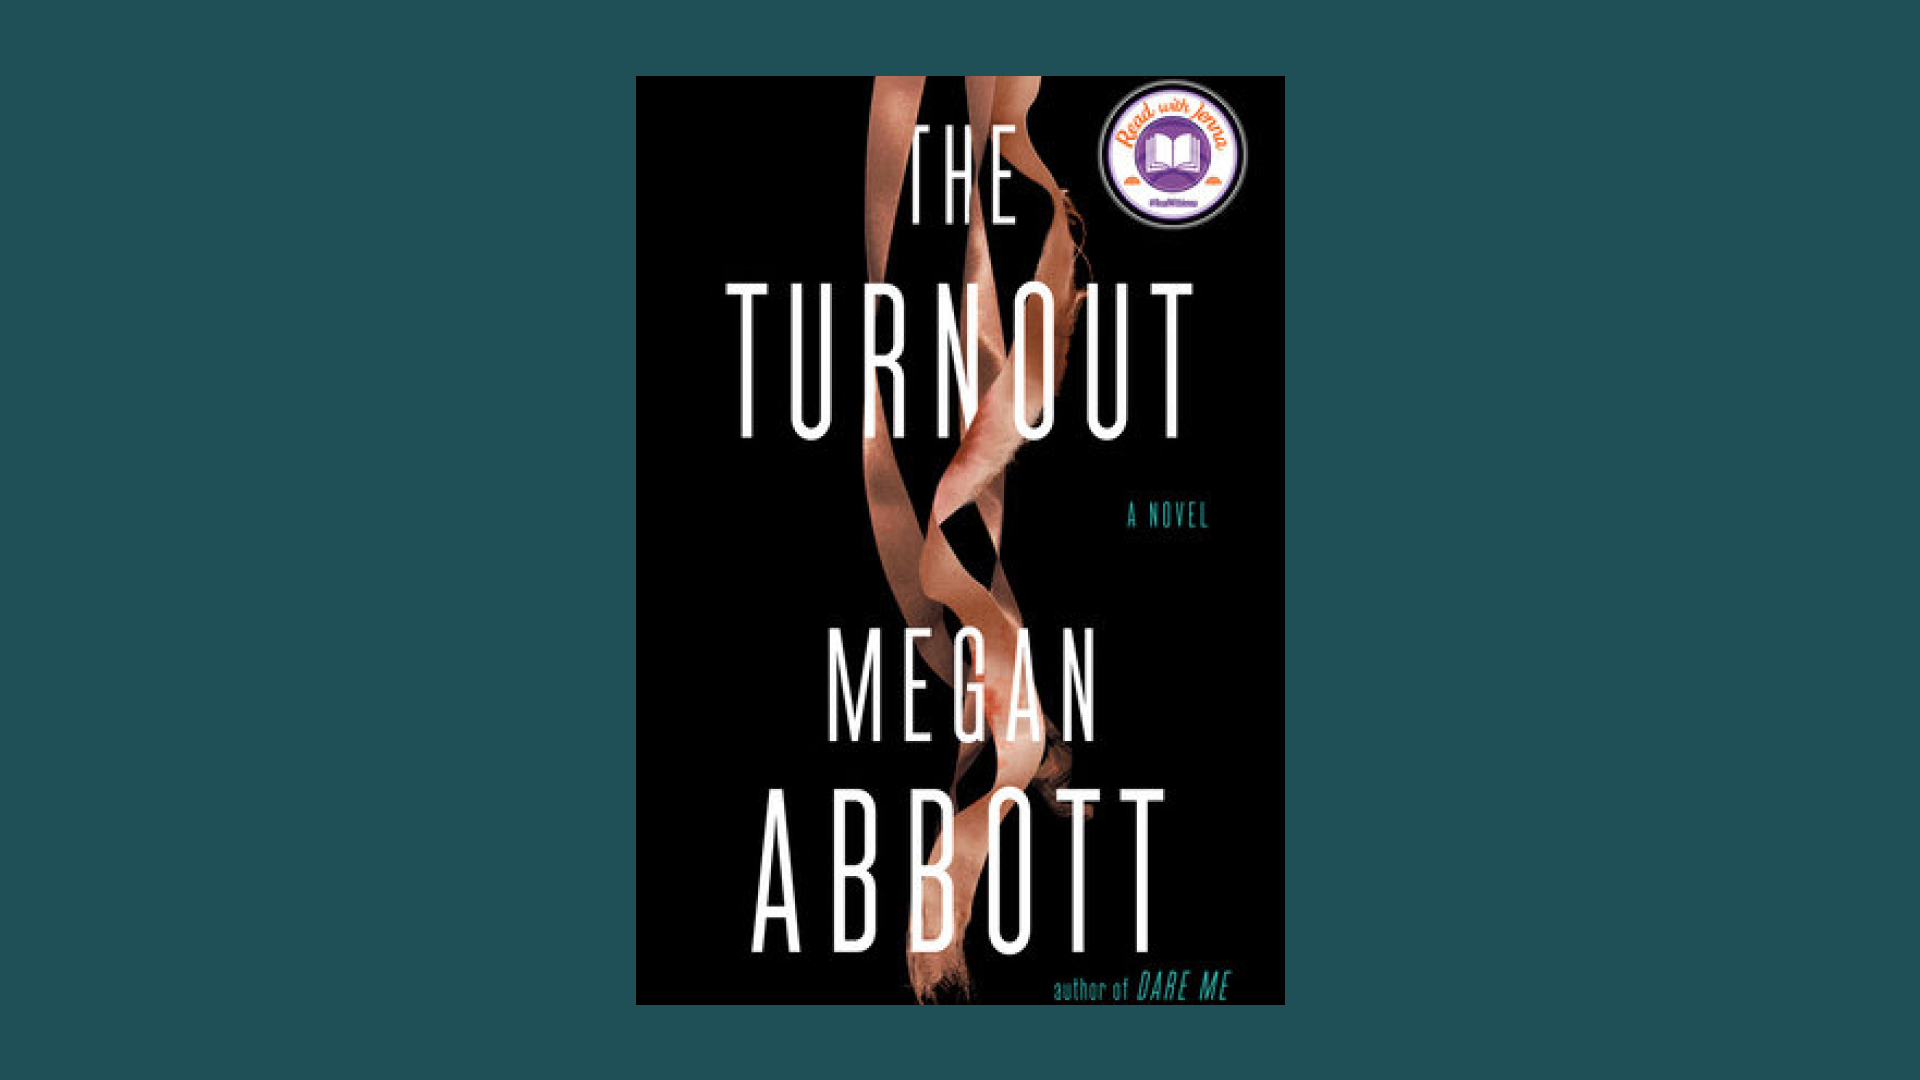 “The Turnout” by Megan Abbott 